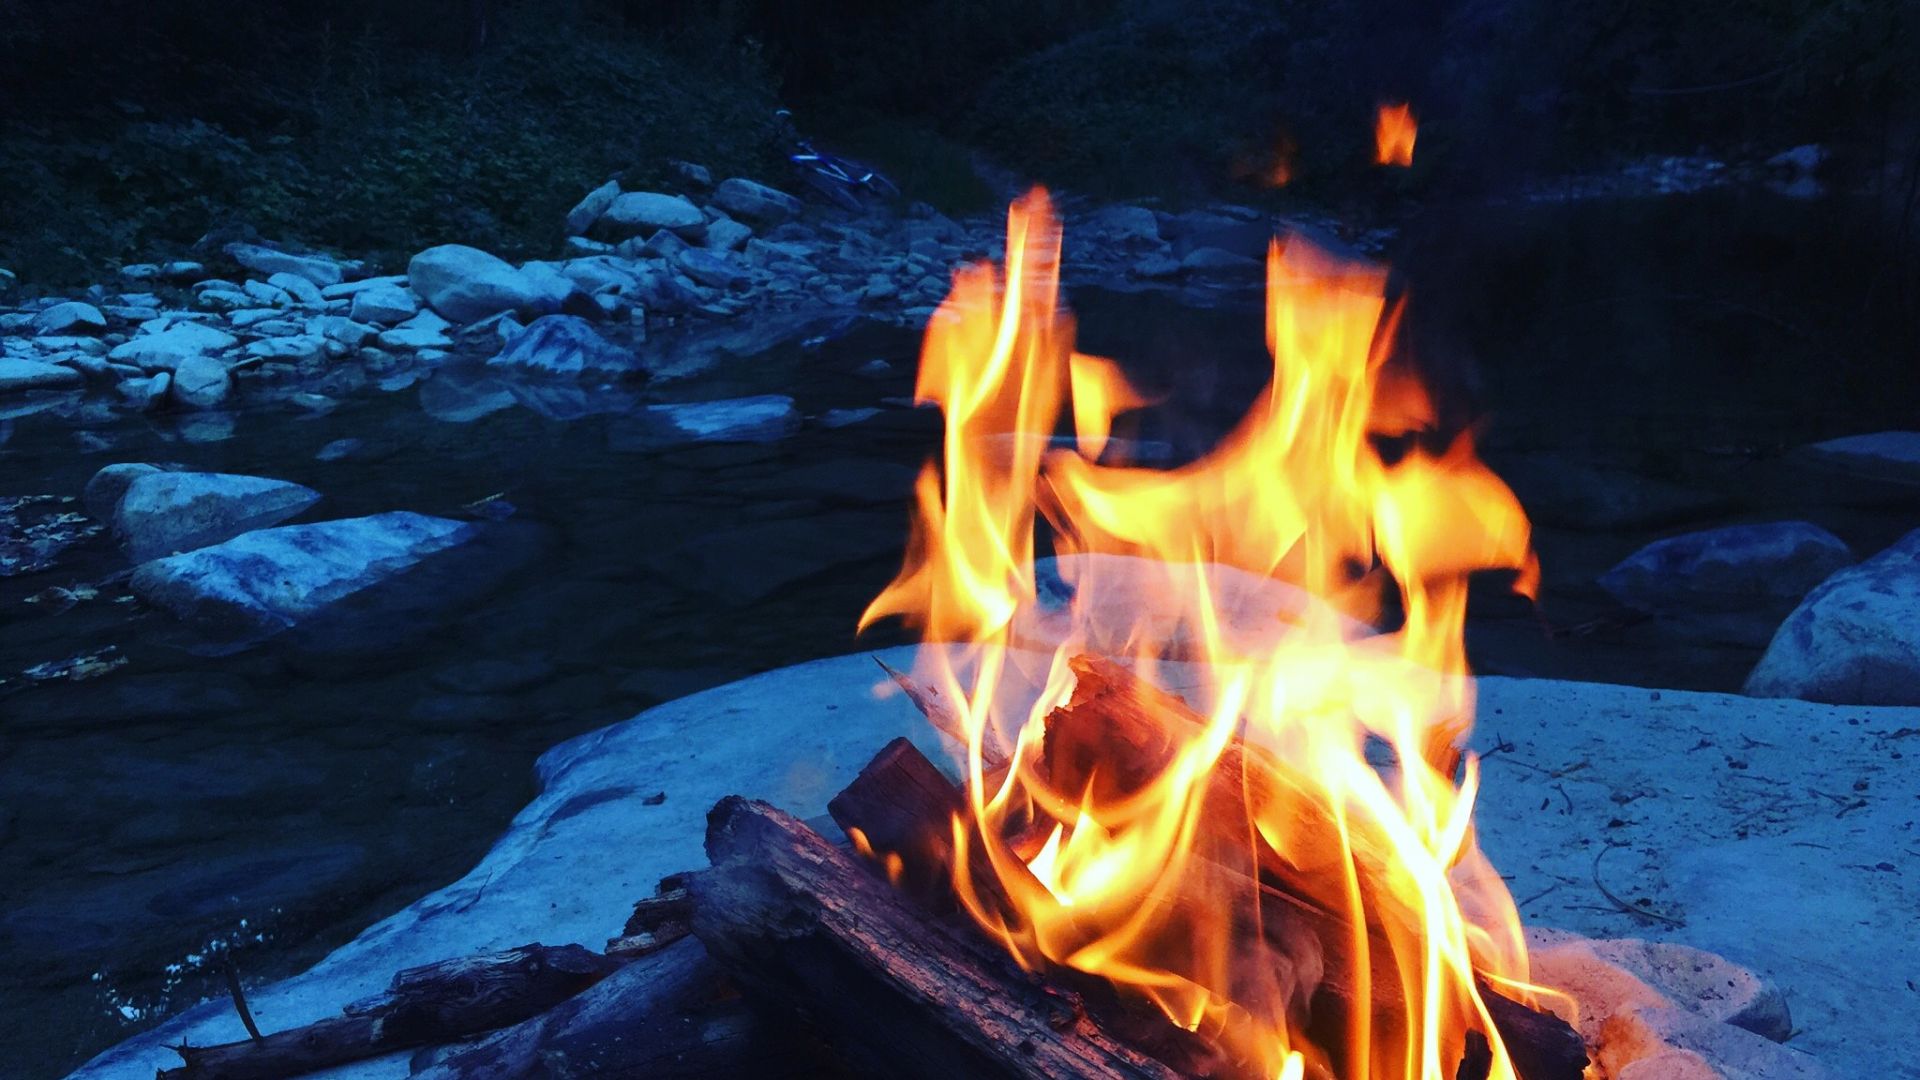 Desktop Wallpaper Winter Fire, Flame, River, HD Image, Picture, Background, Ask81z